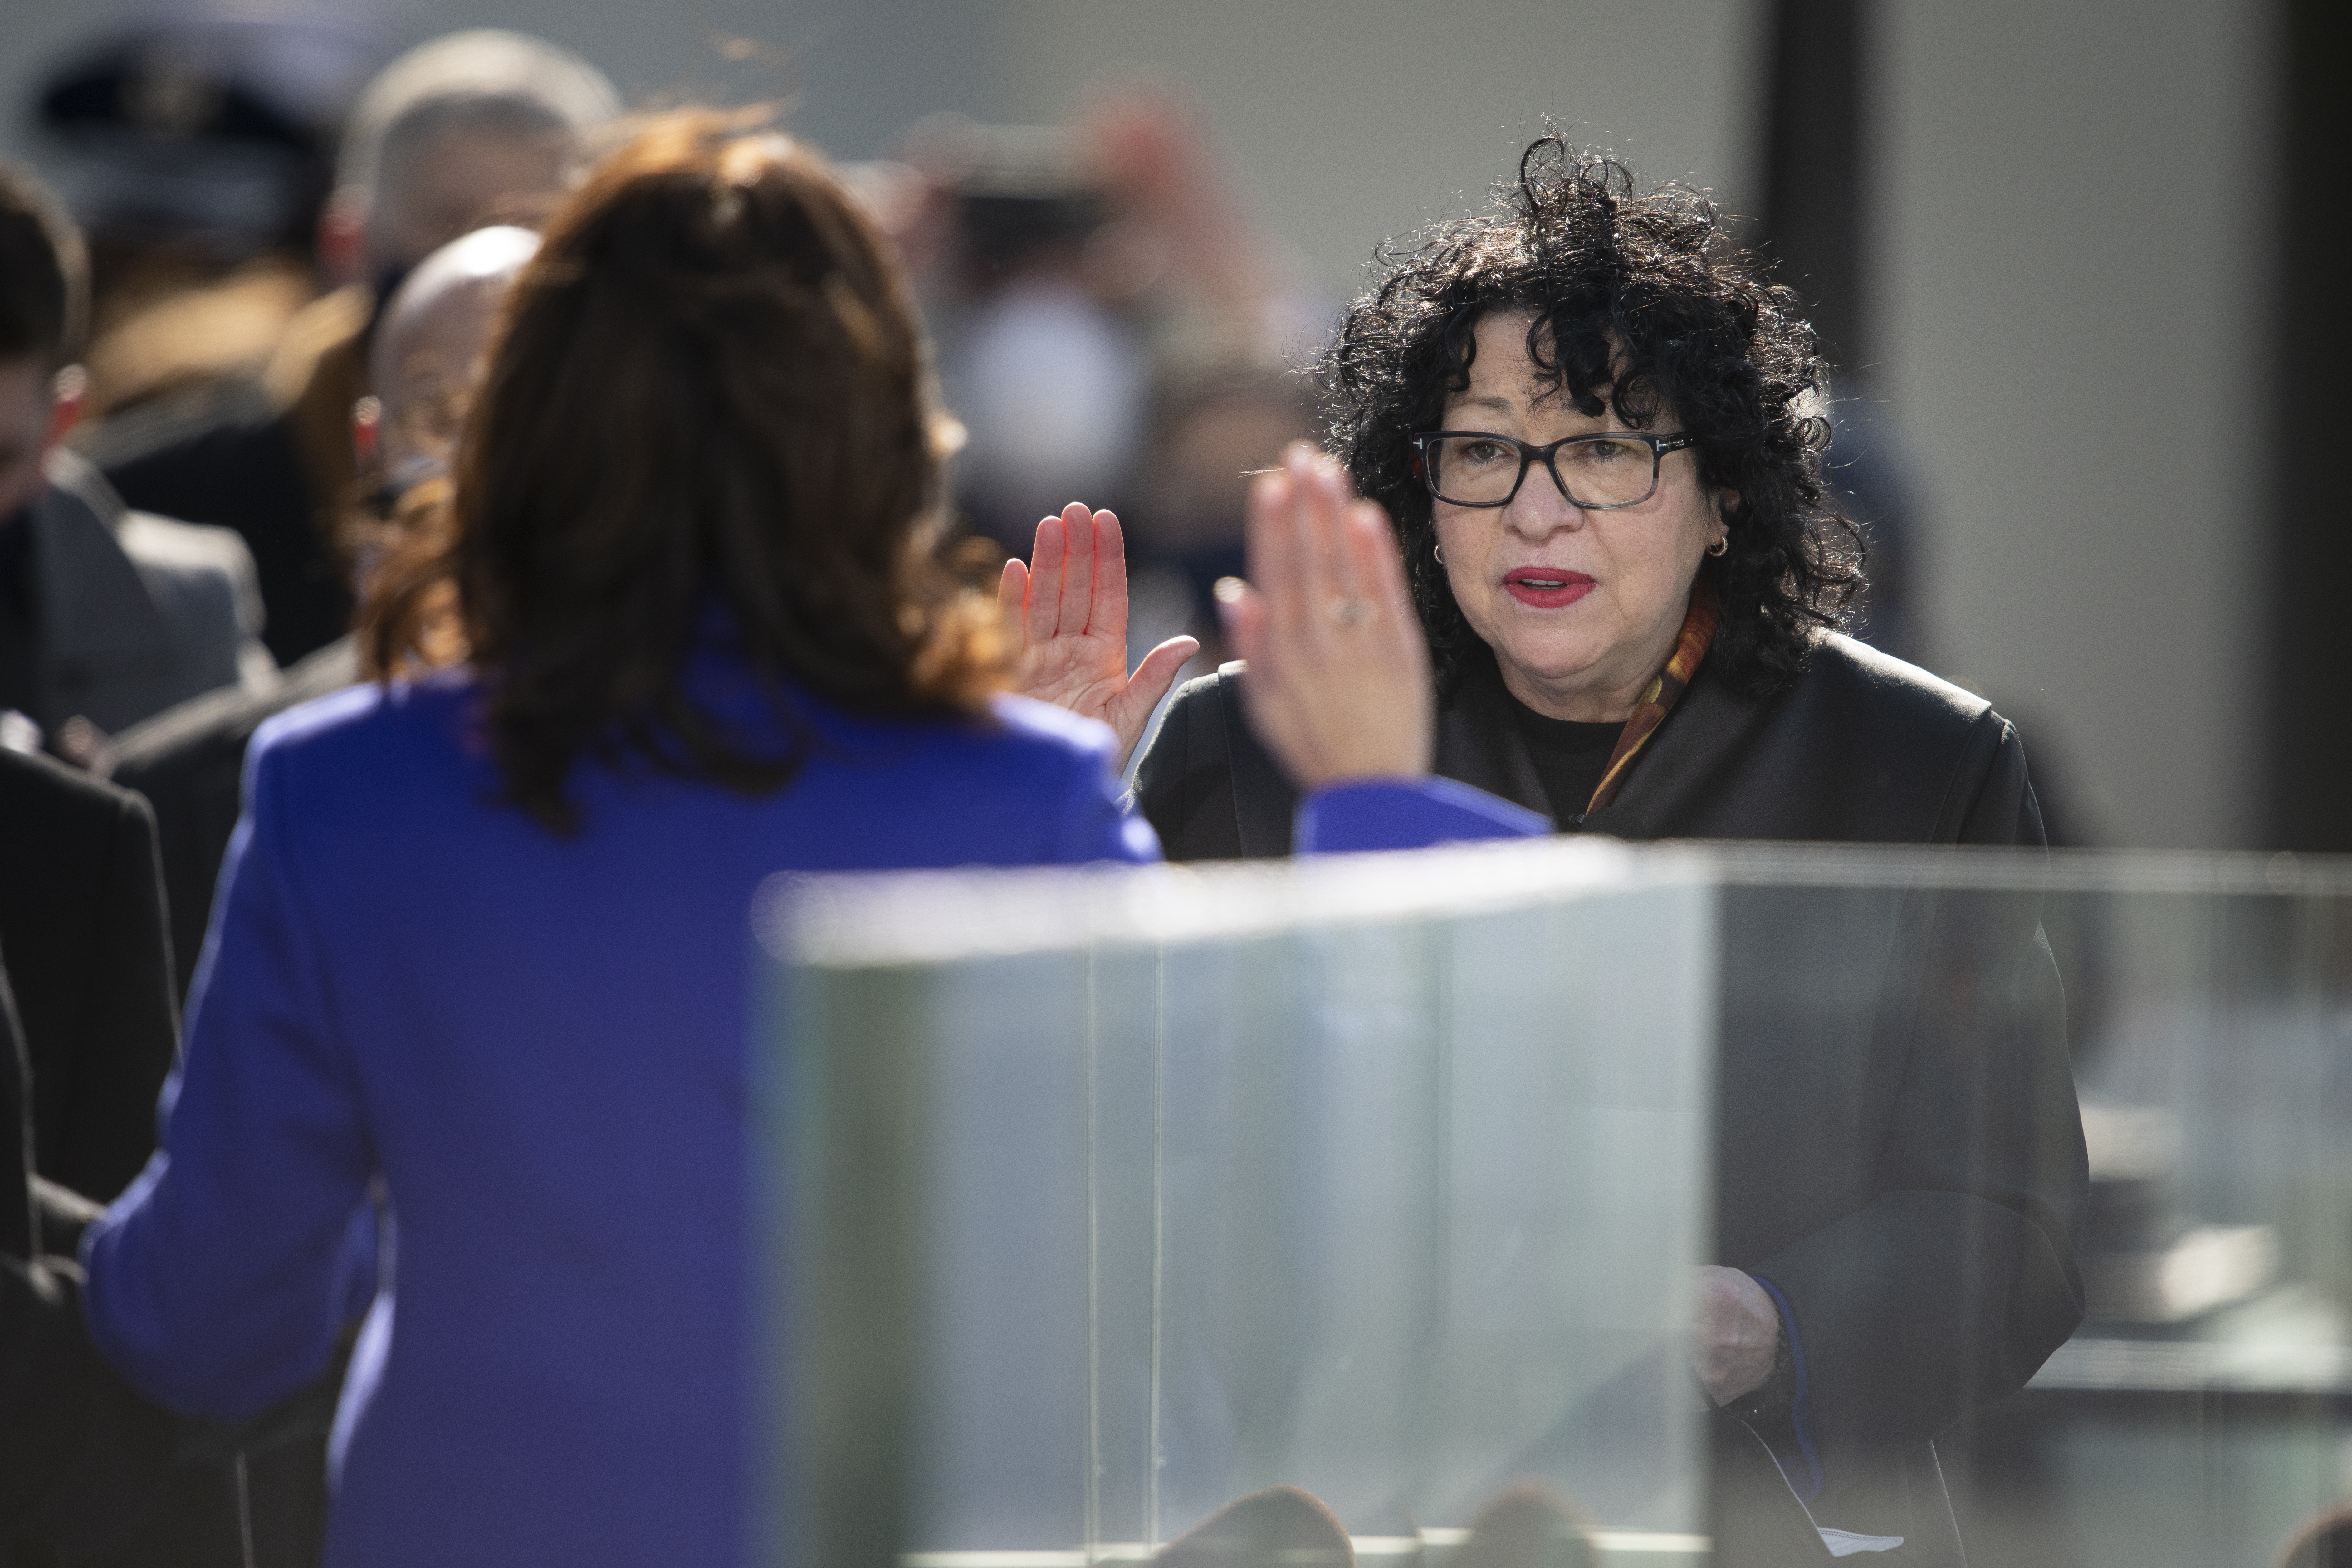 Supreme Court Justice Sonia Sotomayor in a black robe, with Vice President Kamala Harris facing away from the camera